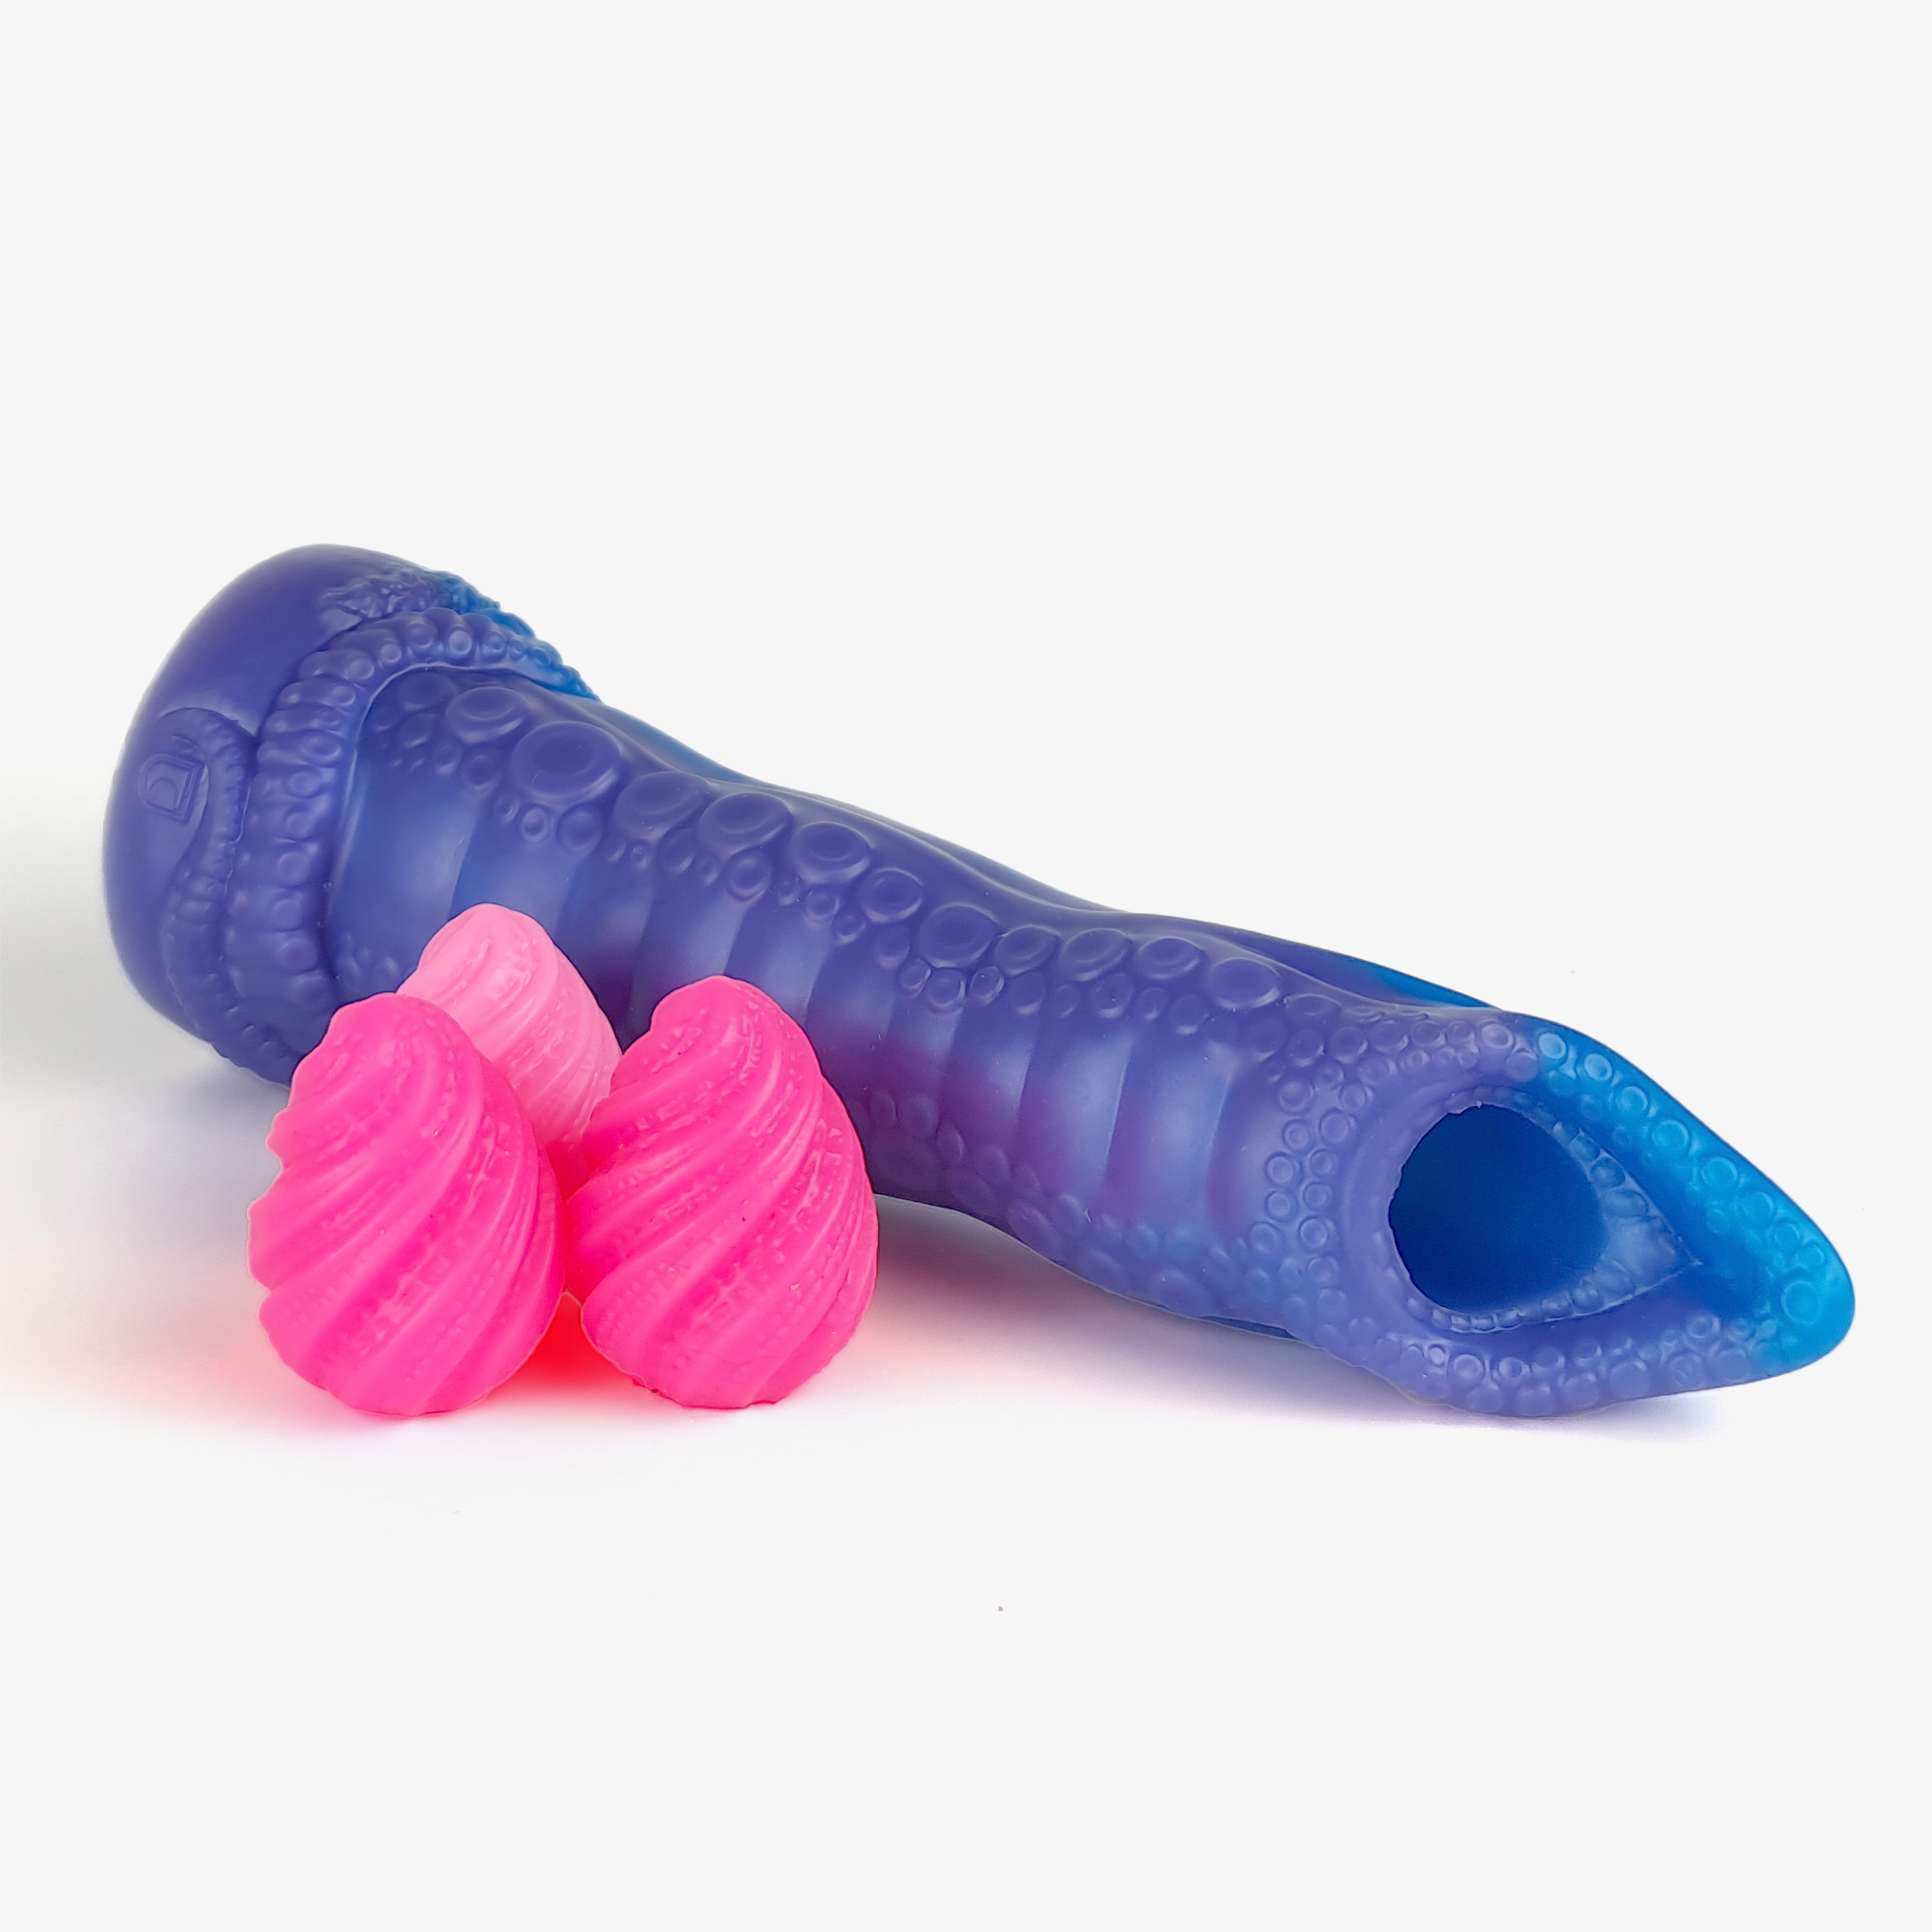 The Tentacle Ovipositor